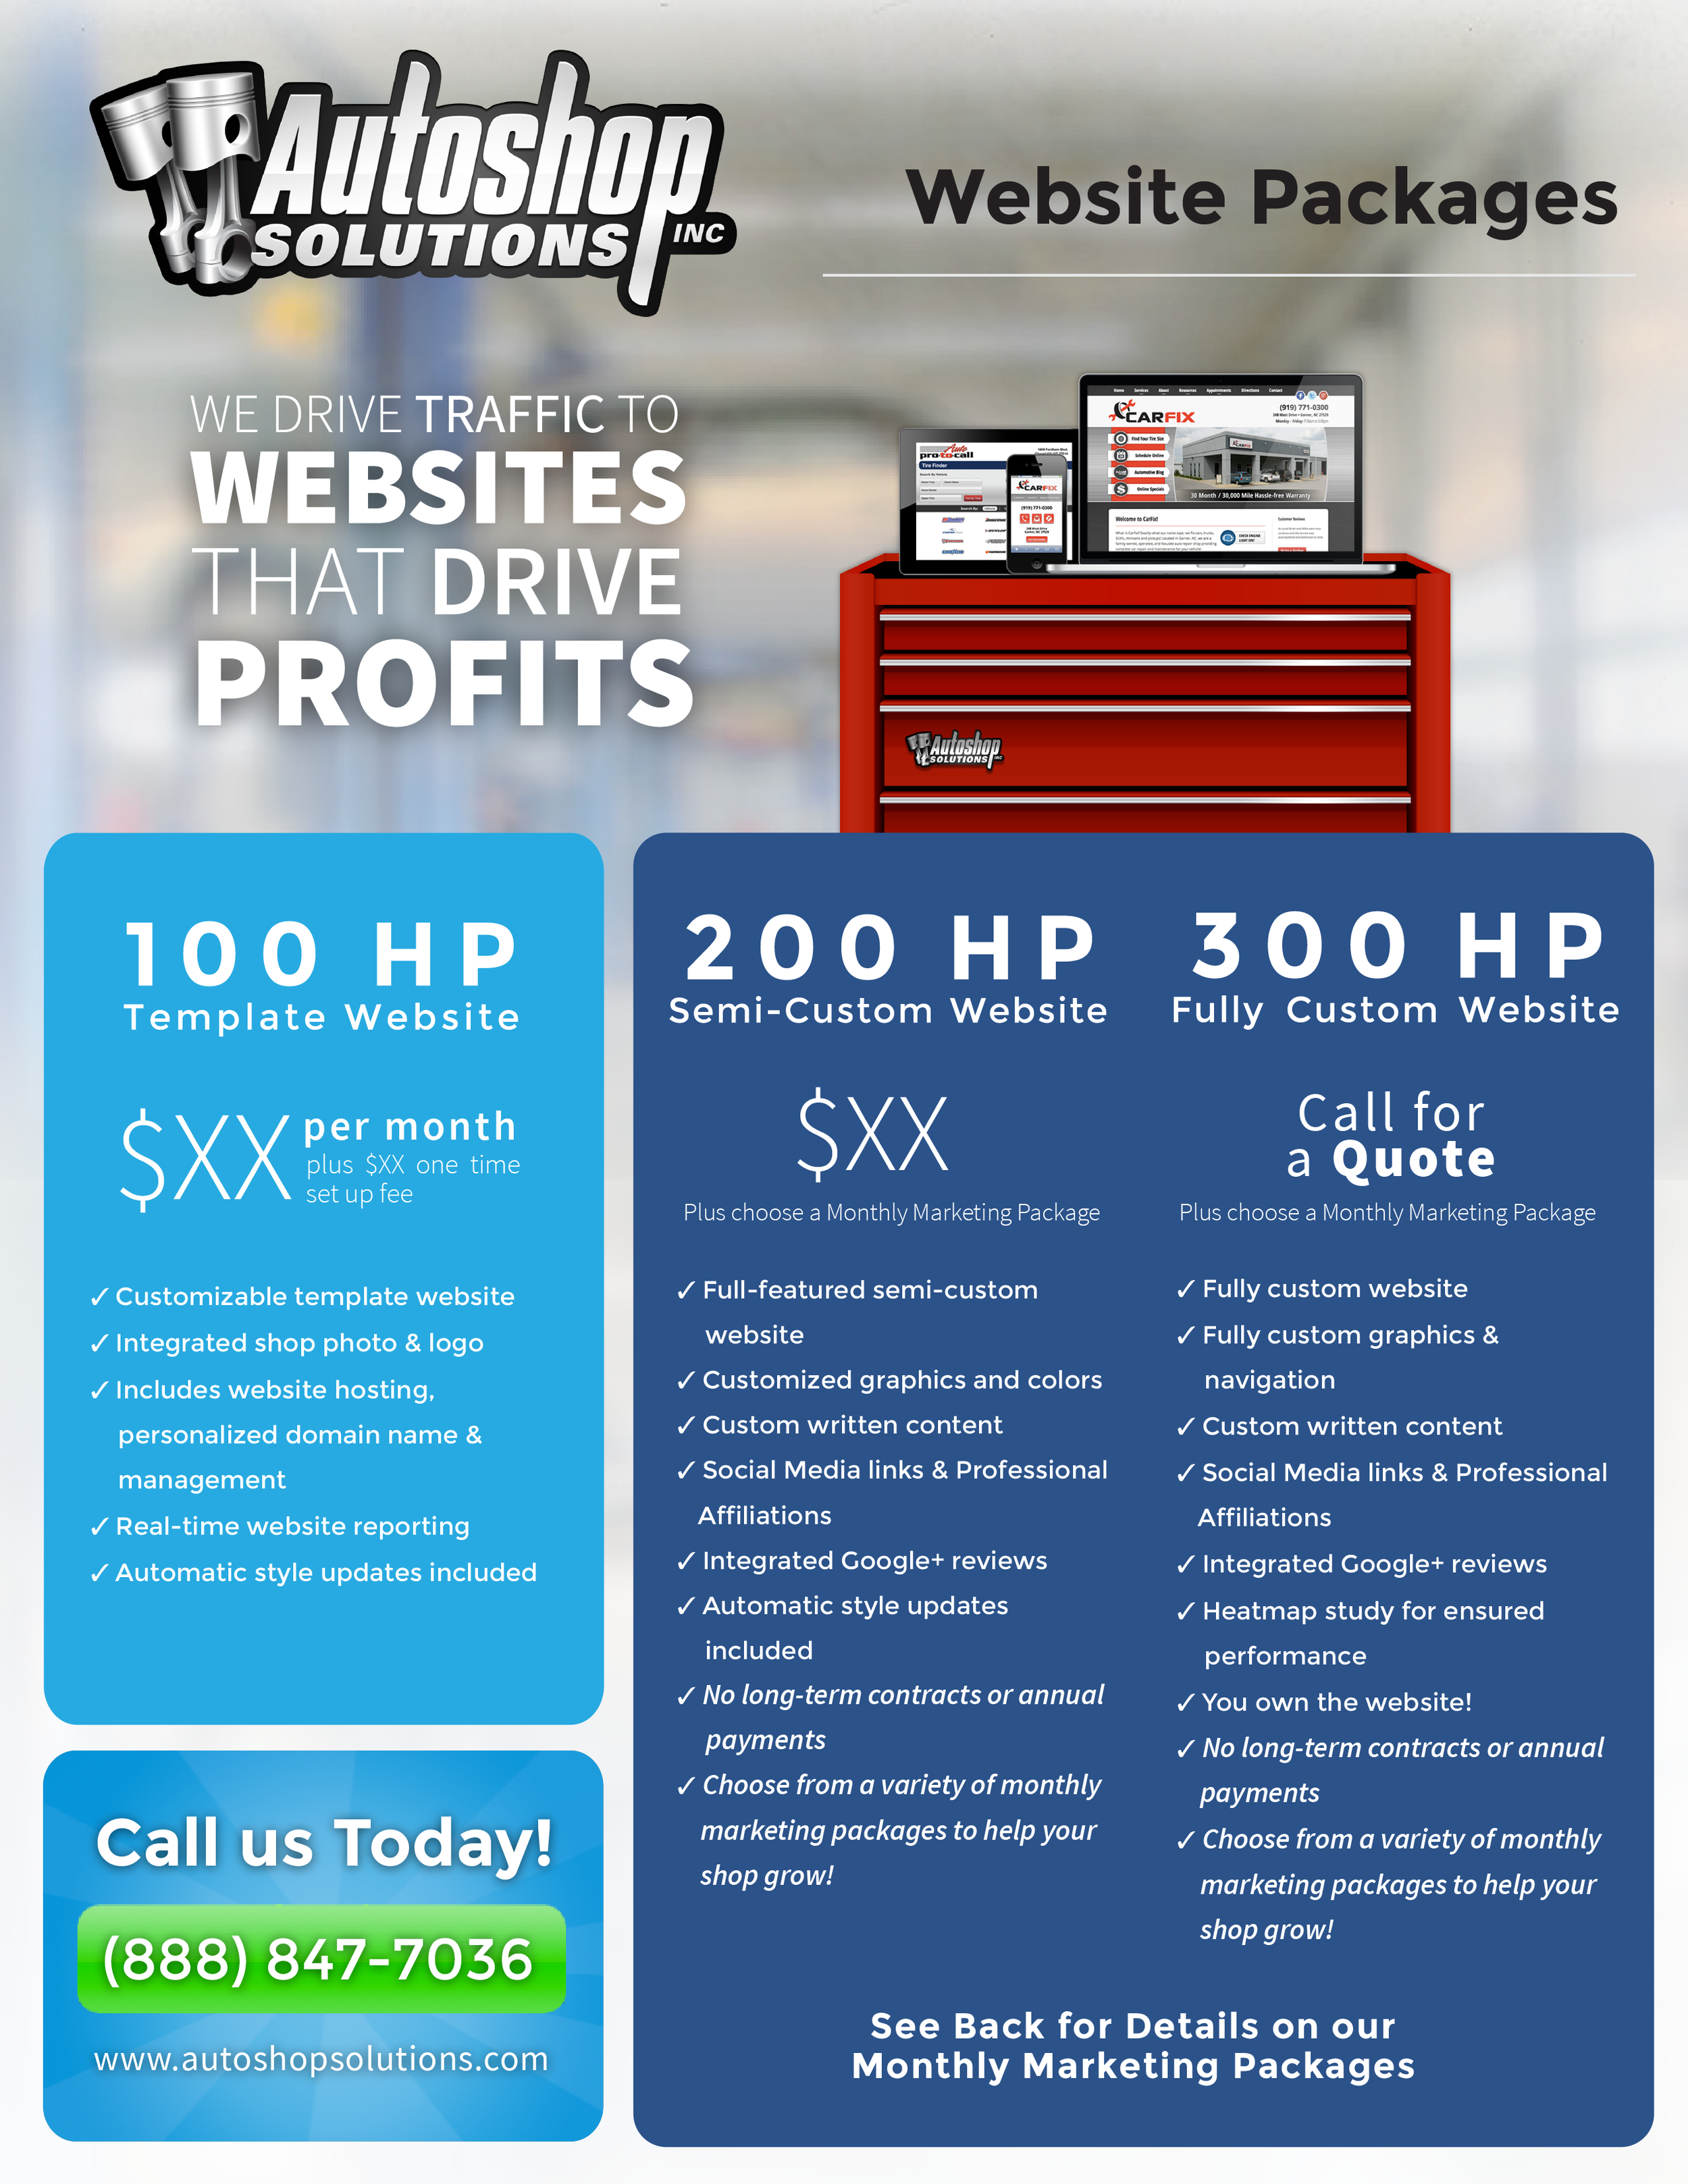 Autoshop Solutions Inc. Website Packages Flyer - Front